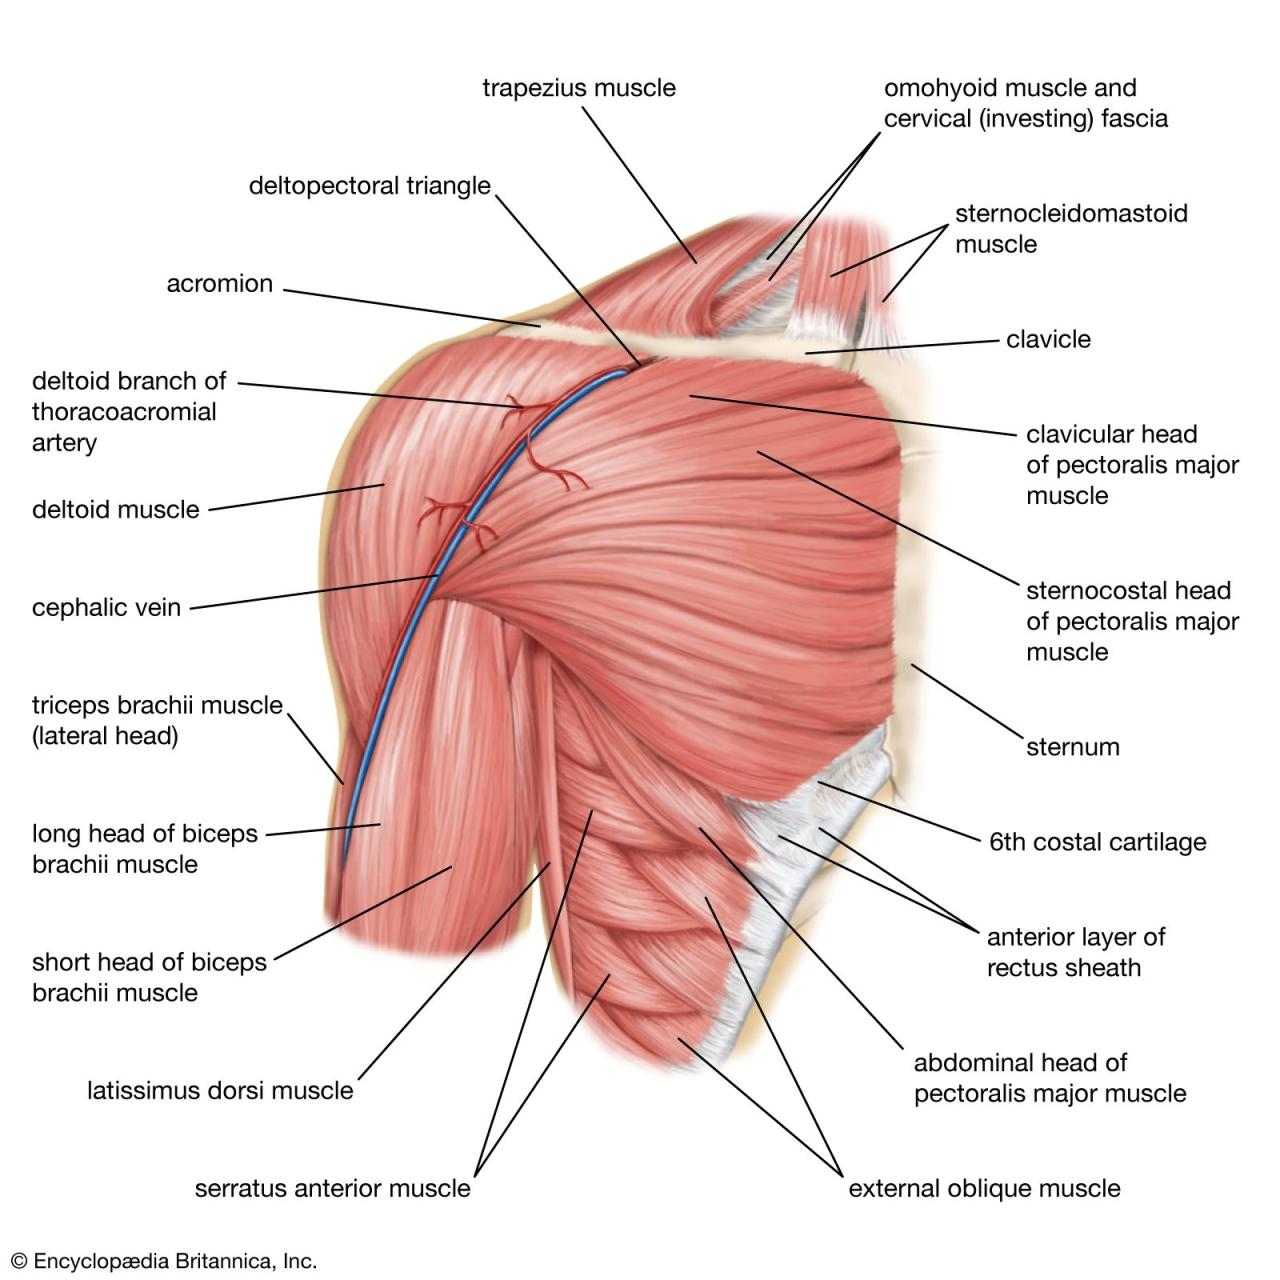 Human Muscle System - Shoulder Muscles, Joints, Movements | Britannica